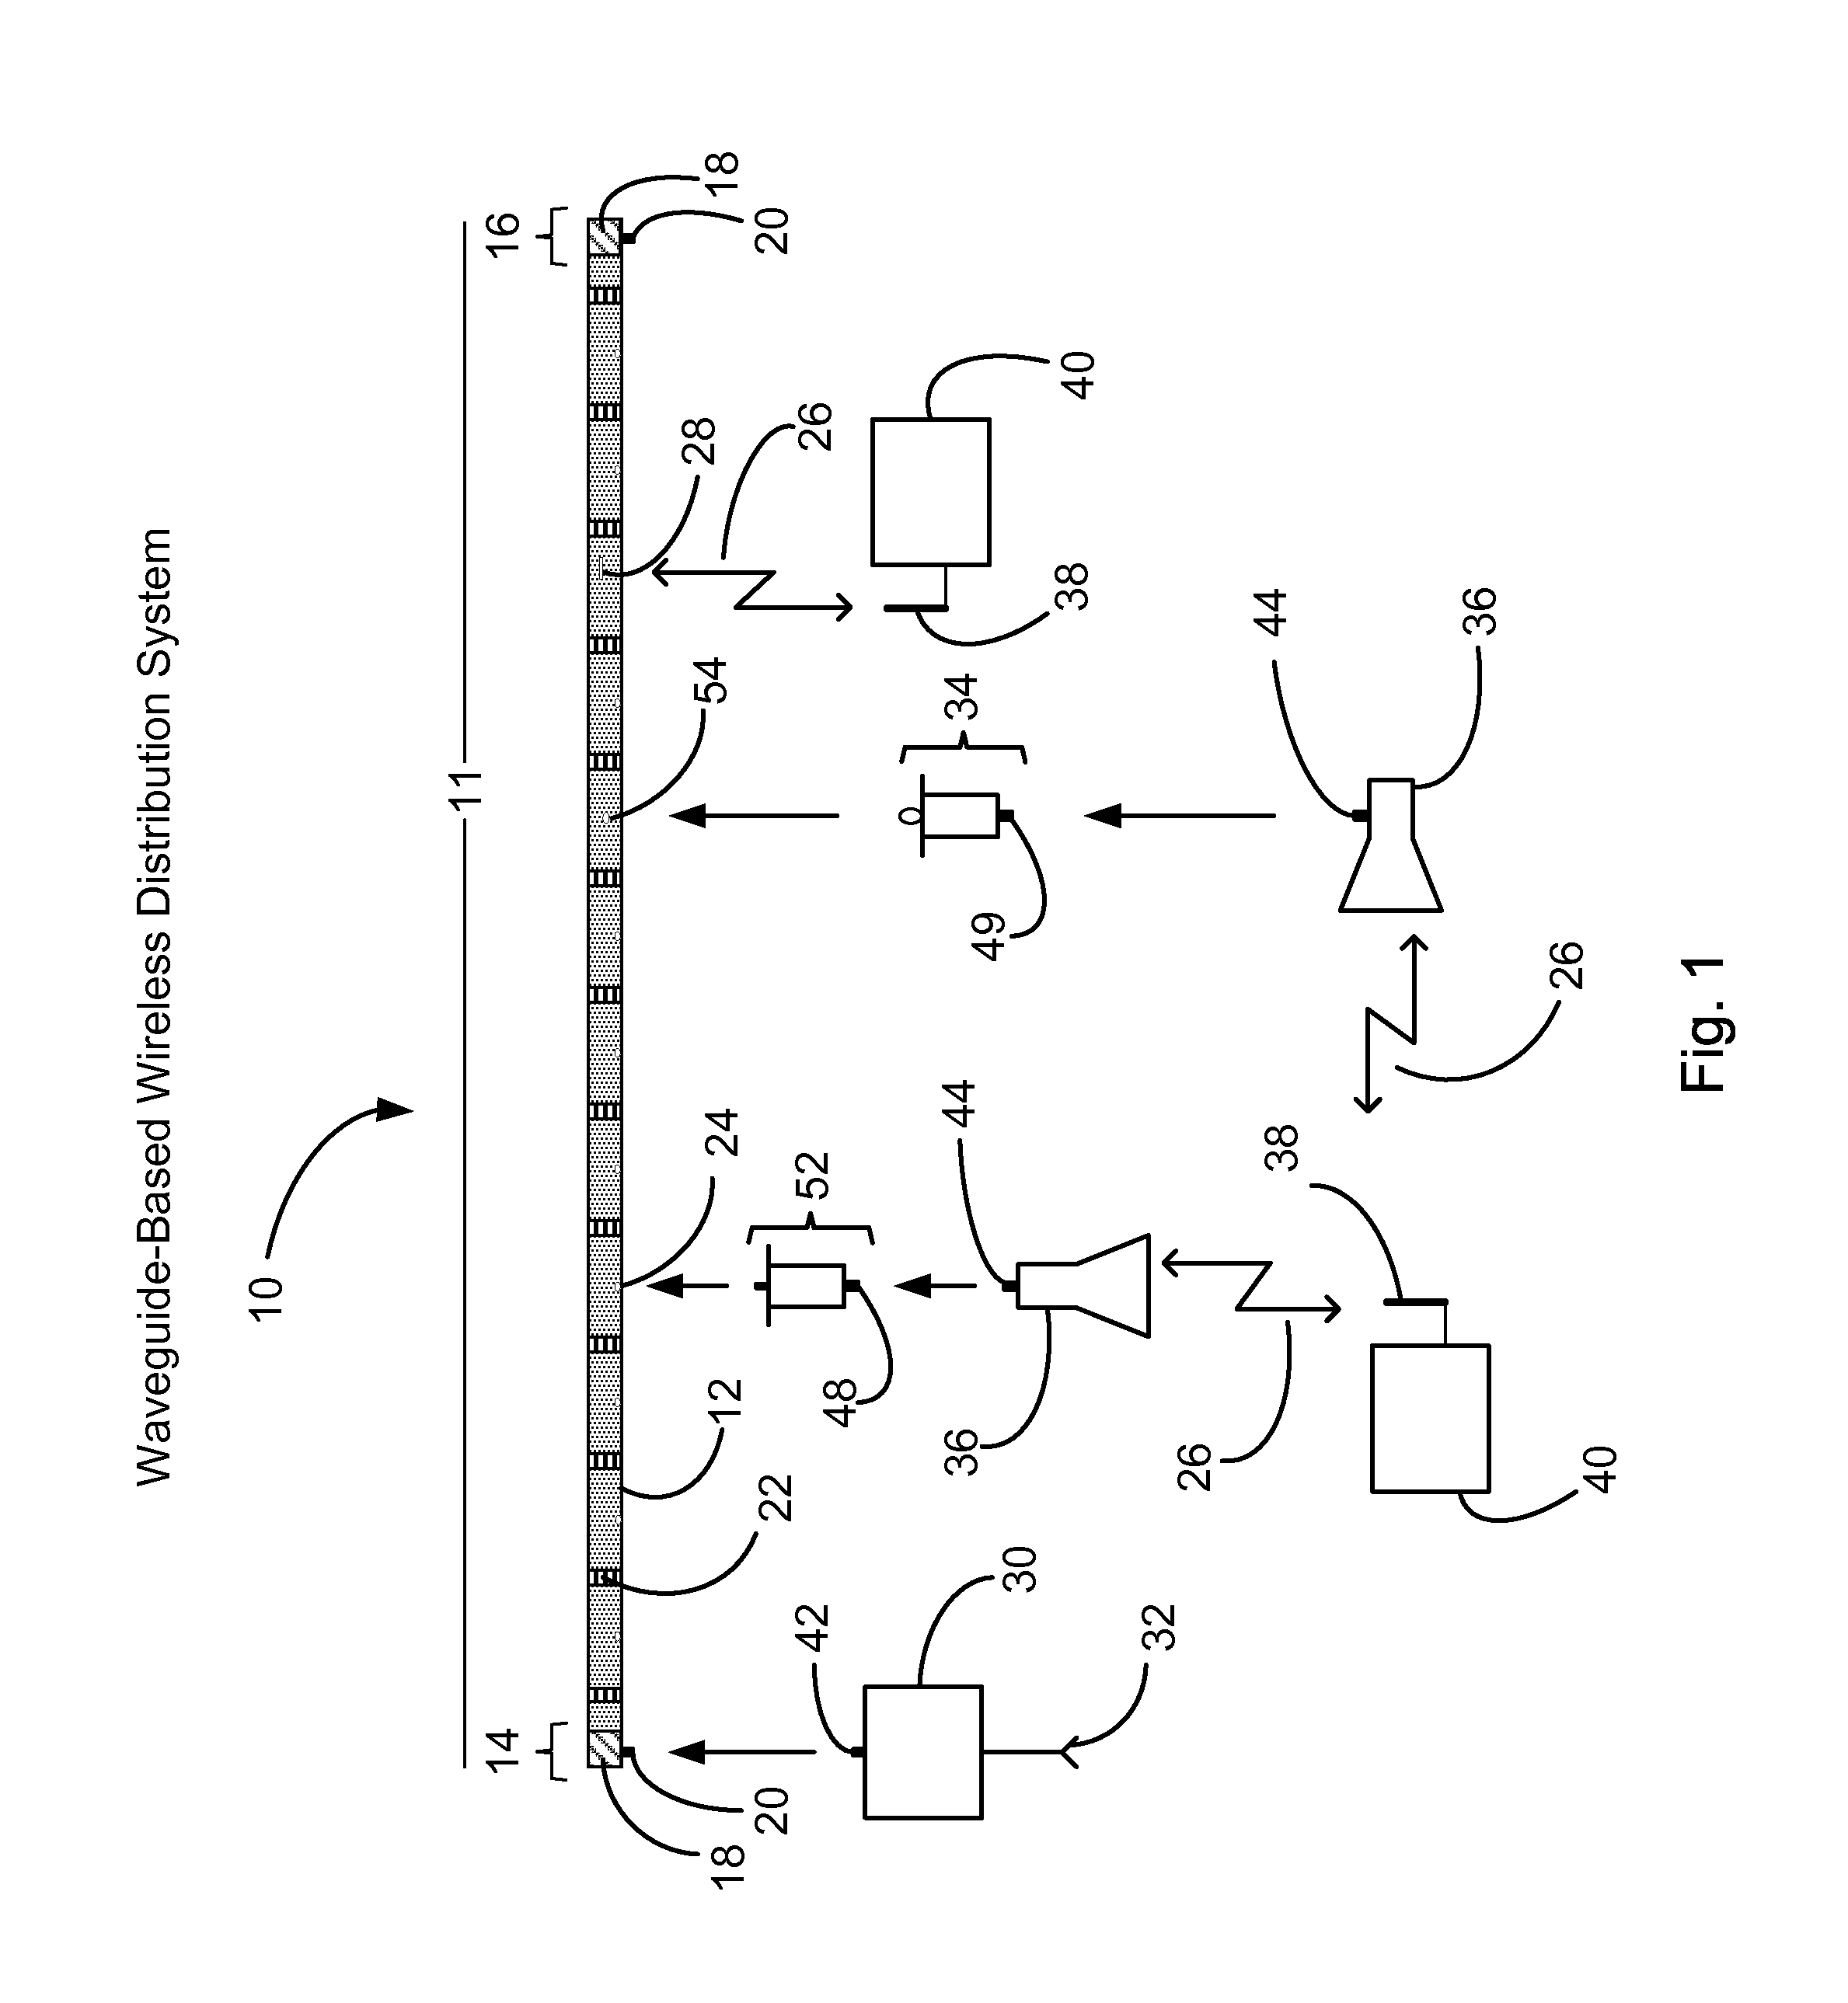 Waveguide-based wireless distribution system and method of operation